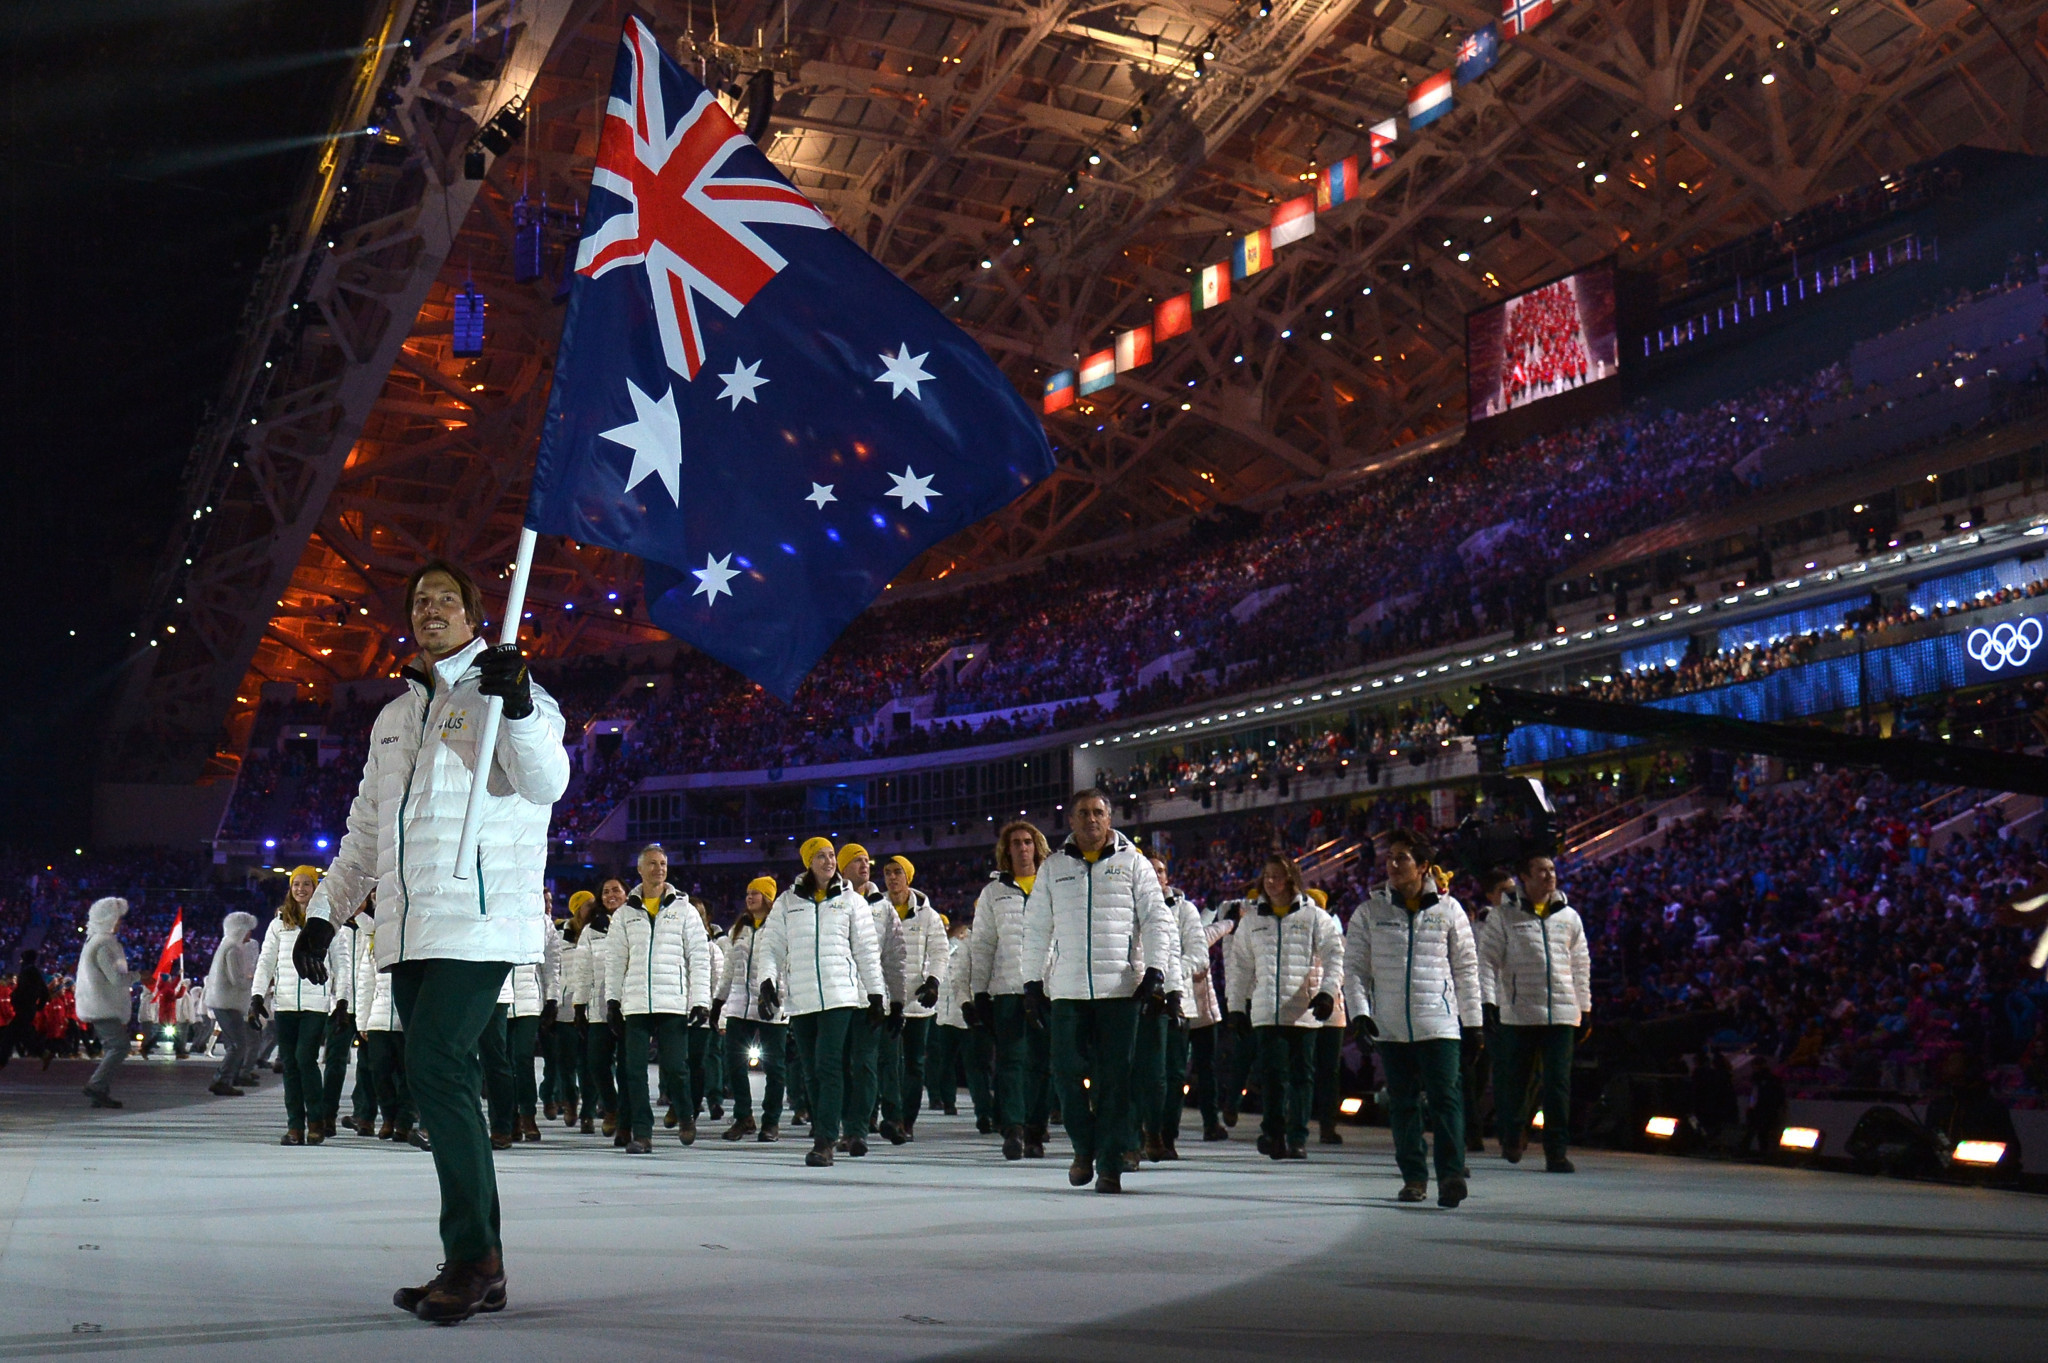 Alex Pullin was Australia's flagbearer at the Opening Ceremony for the Sochi 2014 Winter Olympic Games ©Getty Images